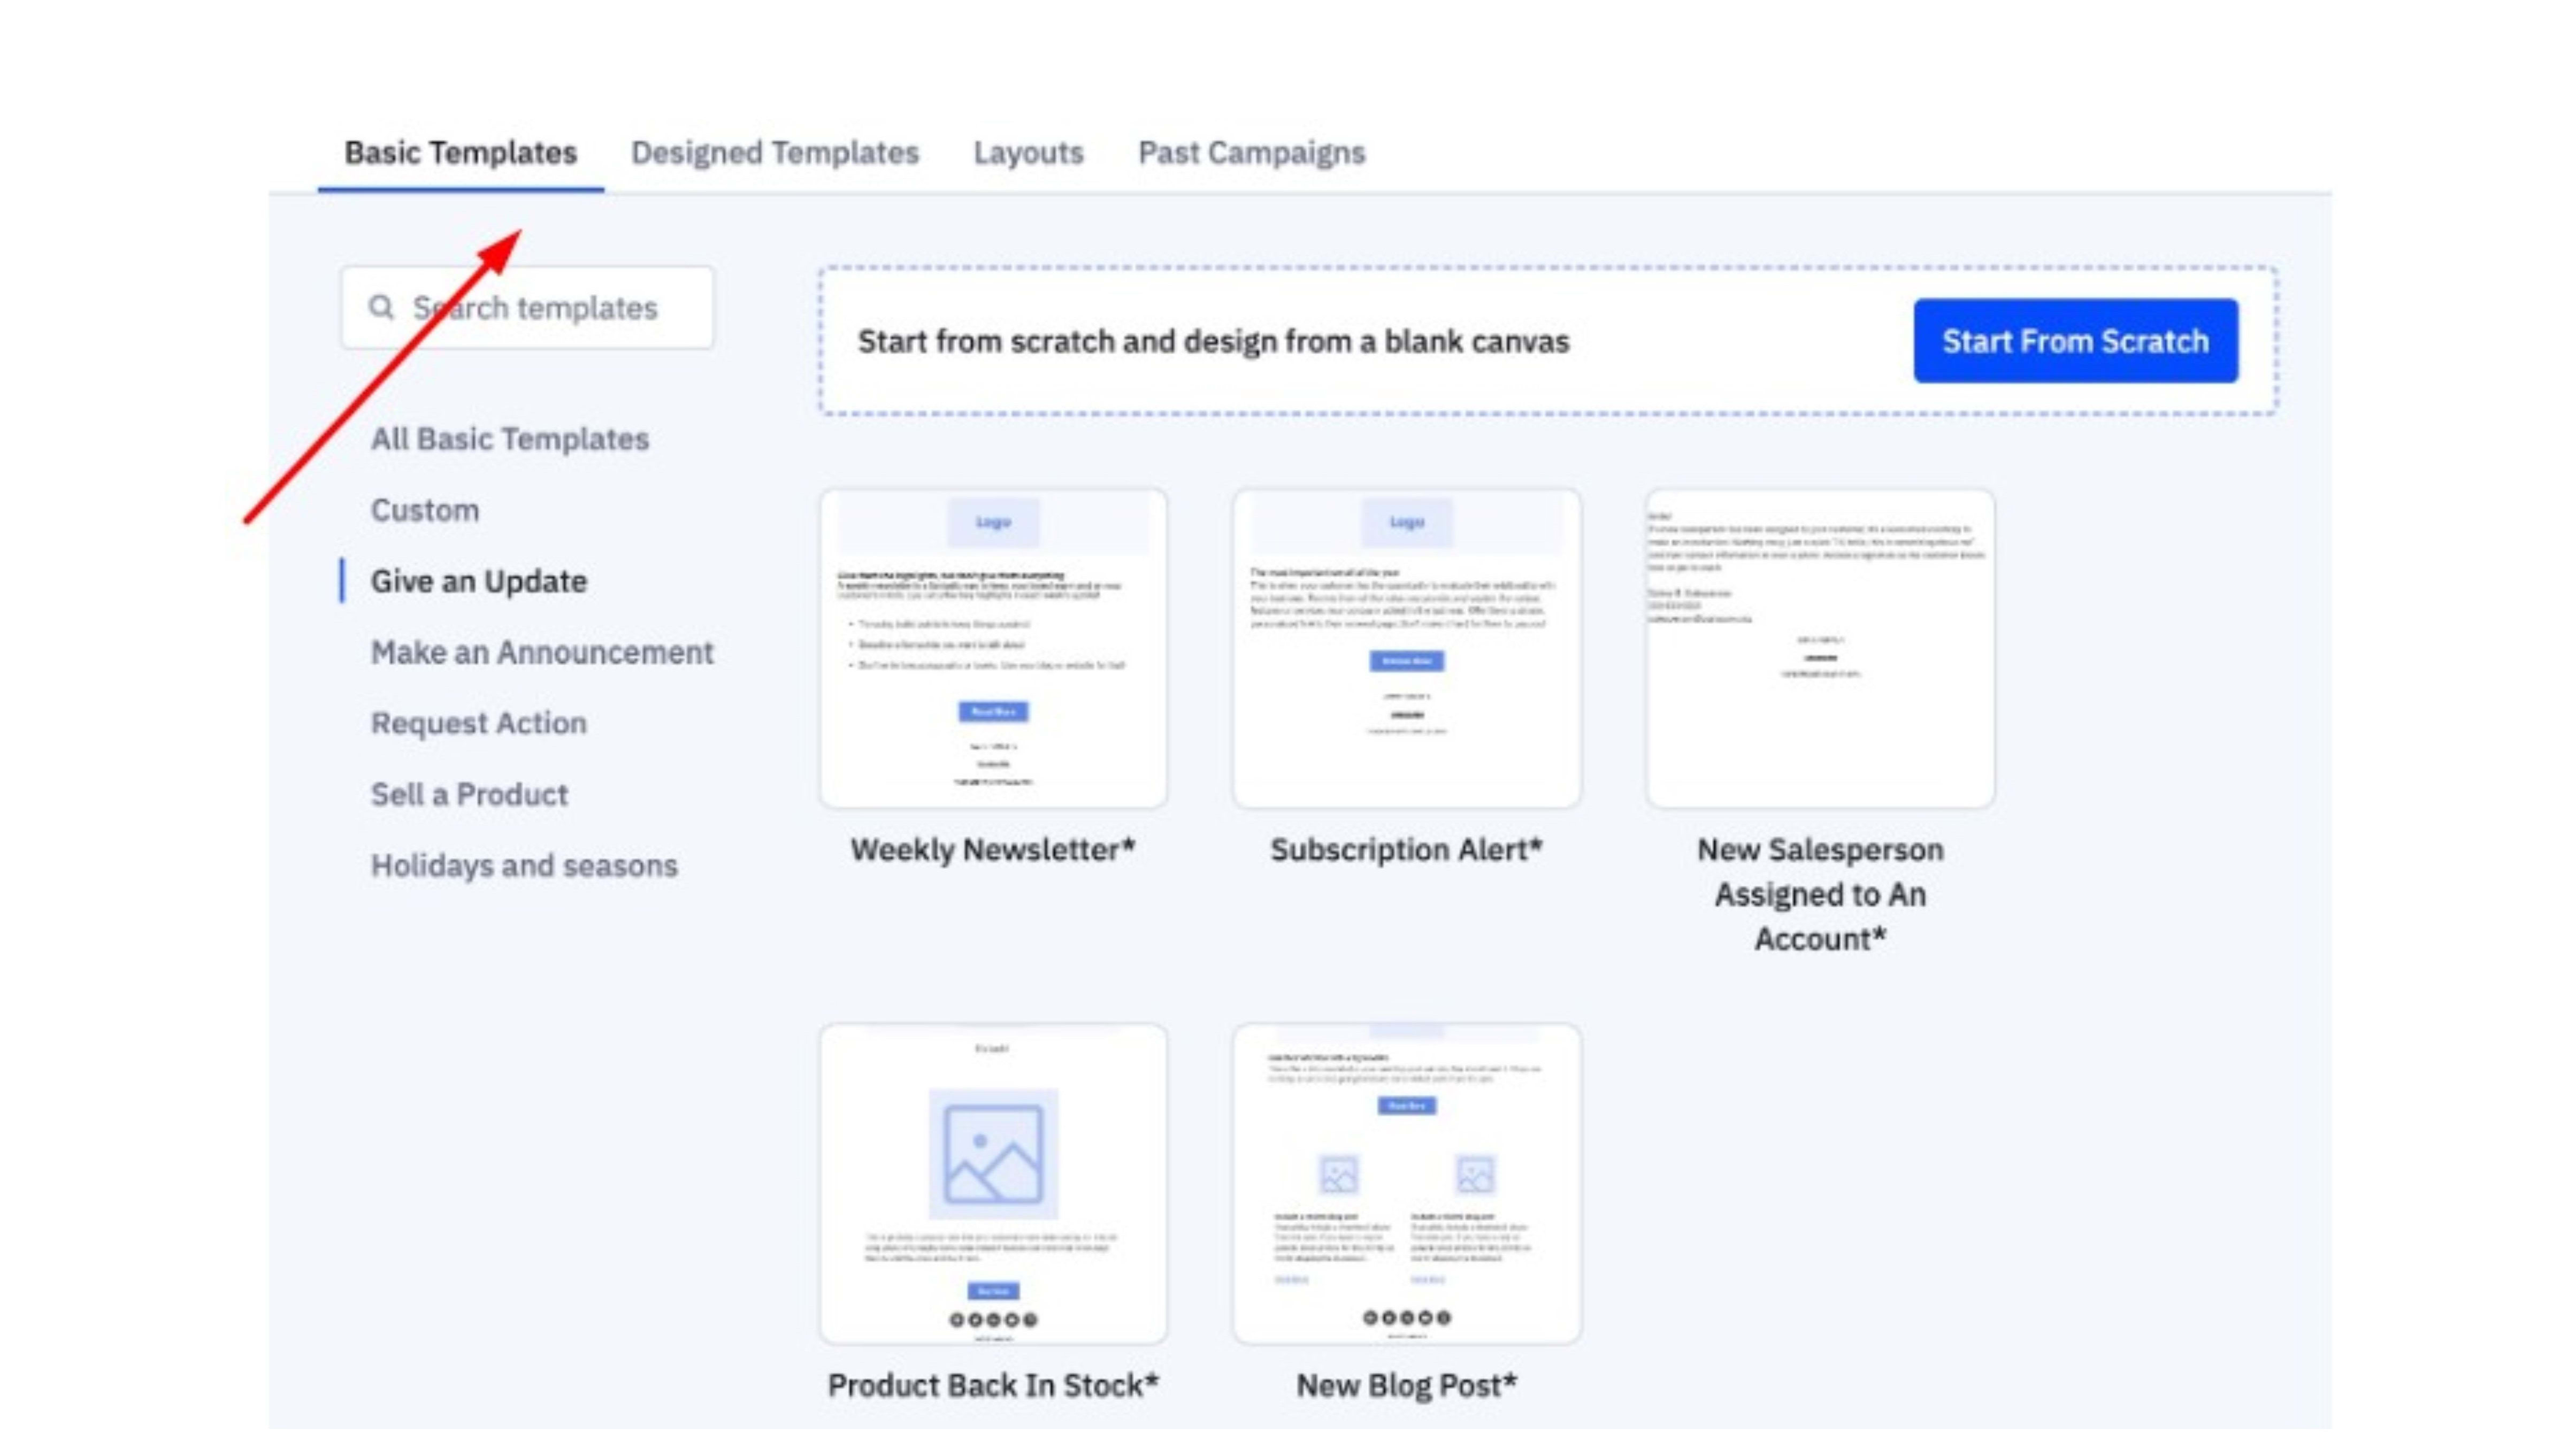 ActiveCampaign’s Email Template Dashboard with Categories Across the Top and Examples like a Weekly Newsletter and Subscription Alert